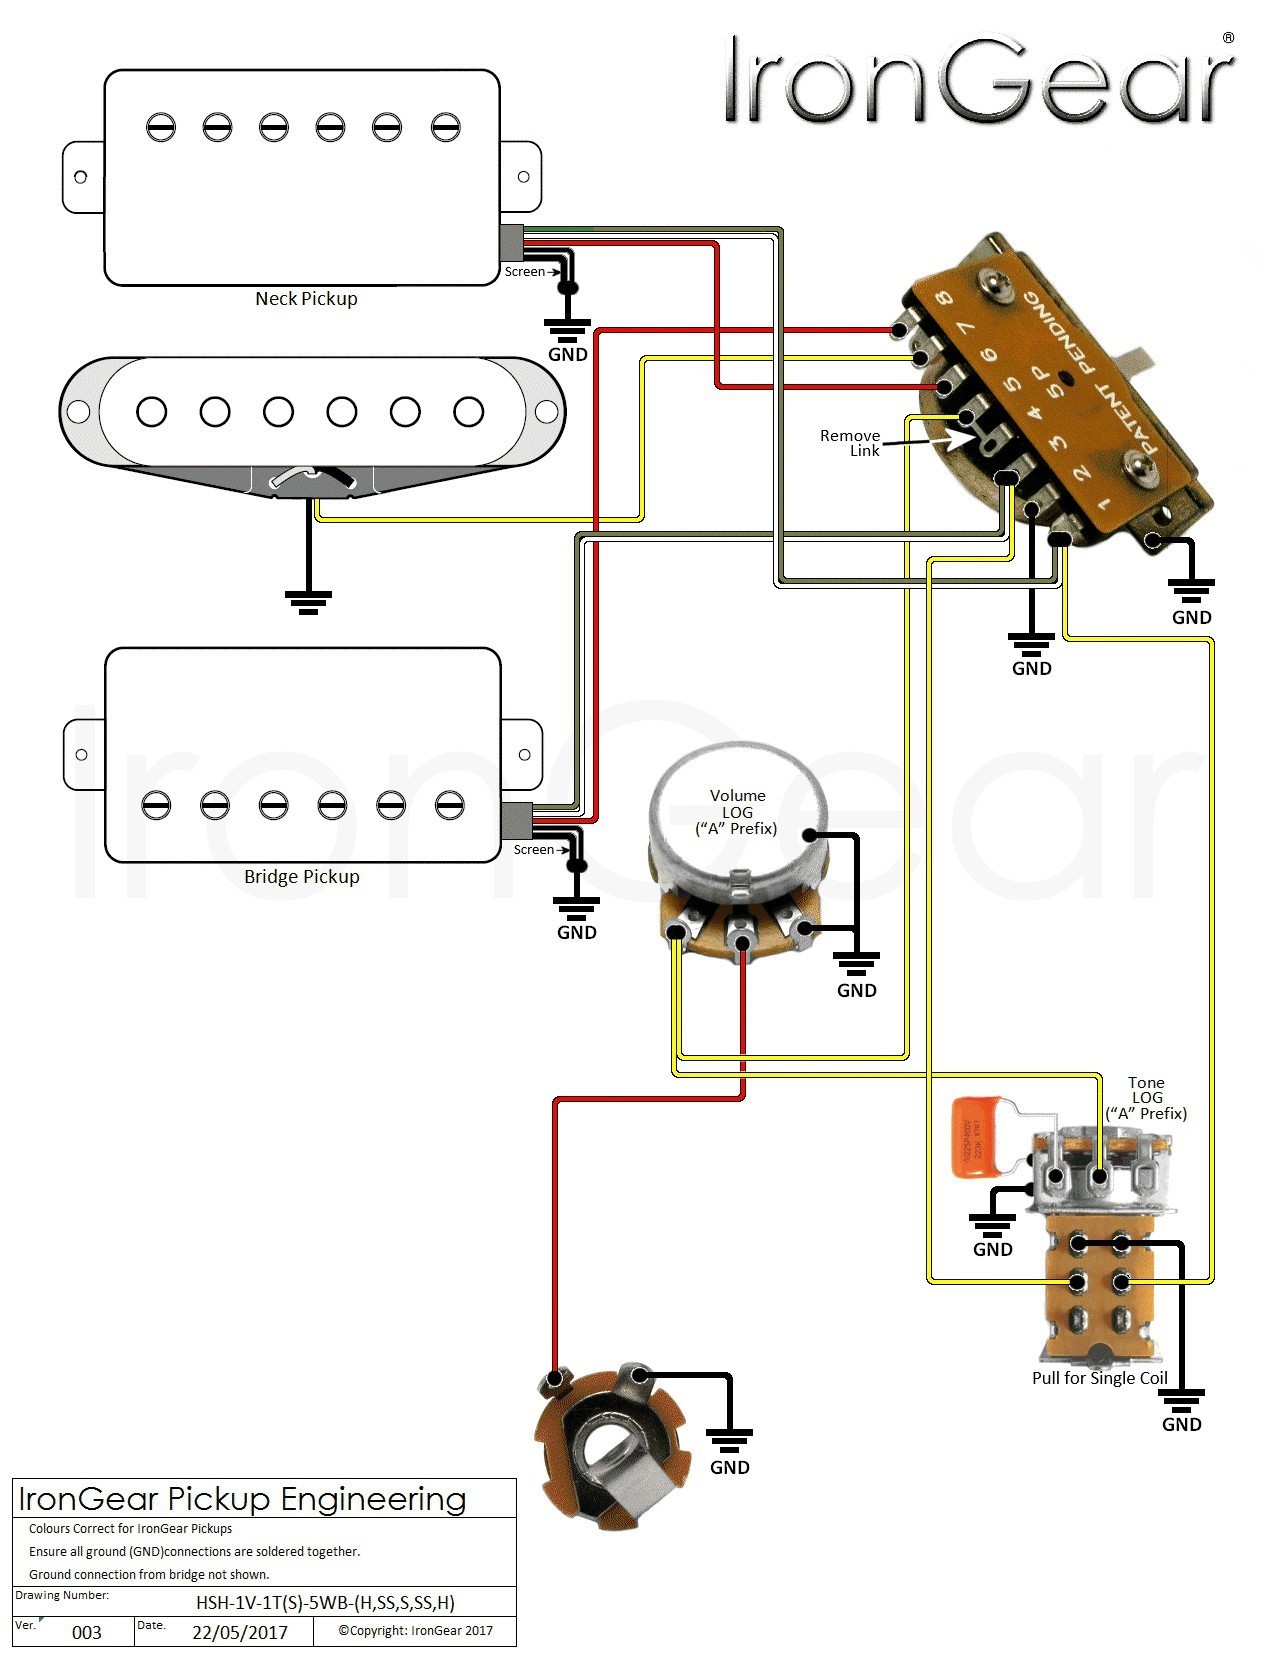 Wiring Diagram for Fender Stratocaster 5 Way Switch Valid Wiring Diagram for Fender Stratocaster 5 Way